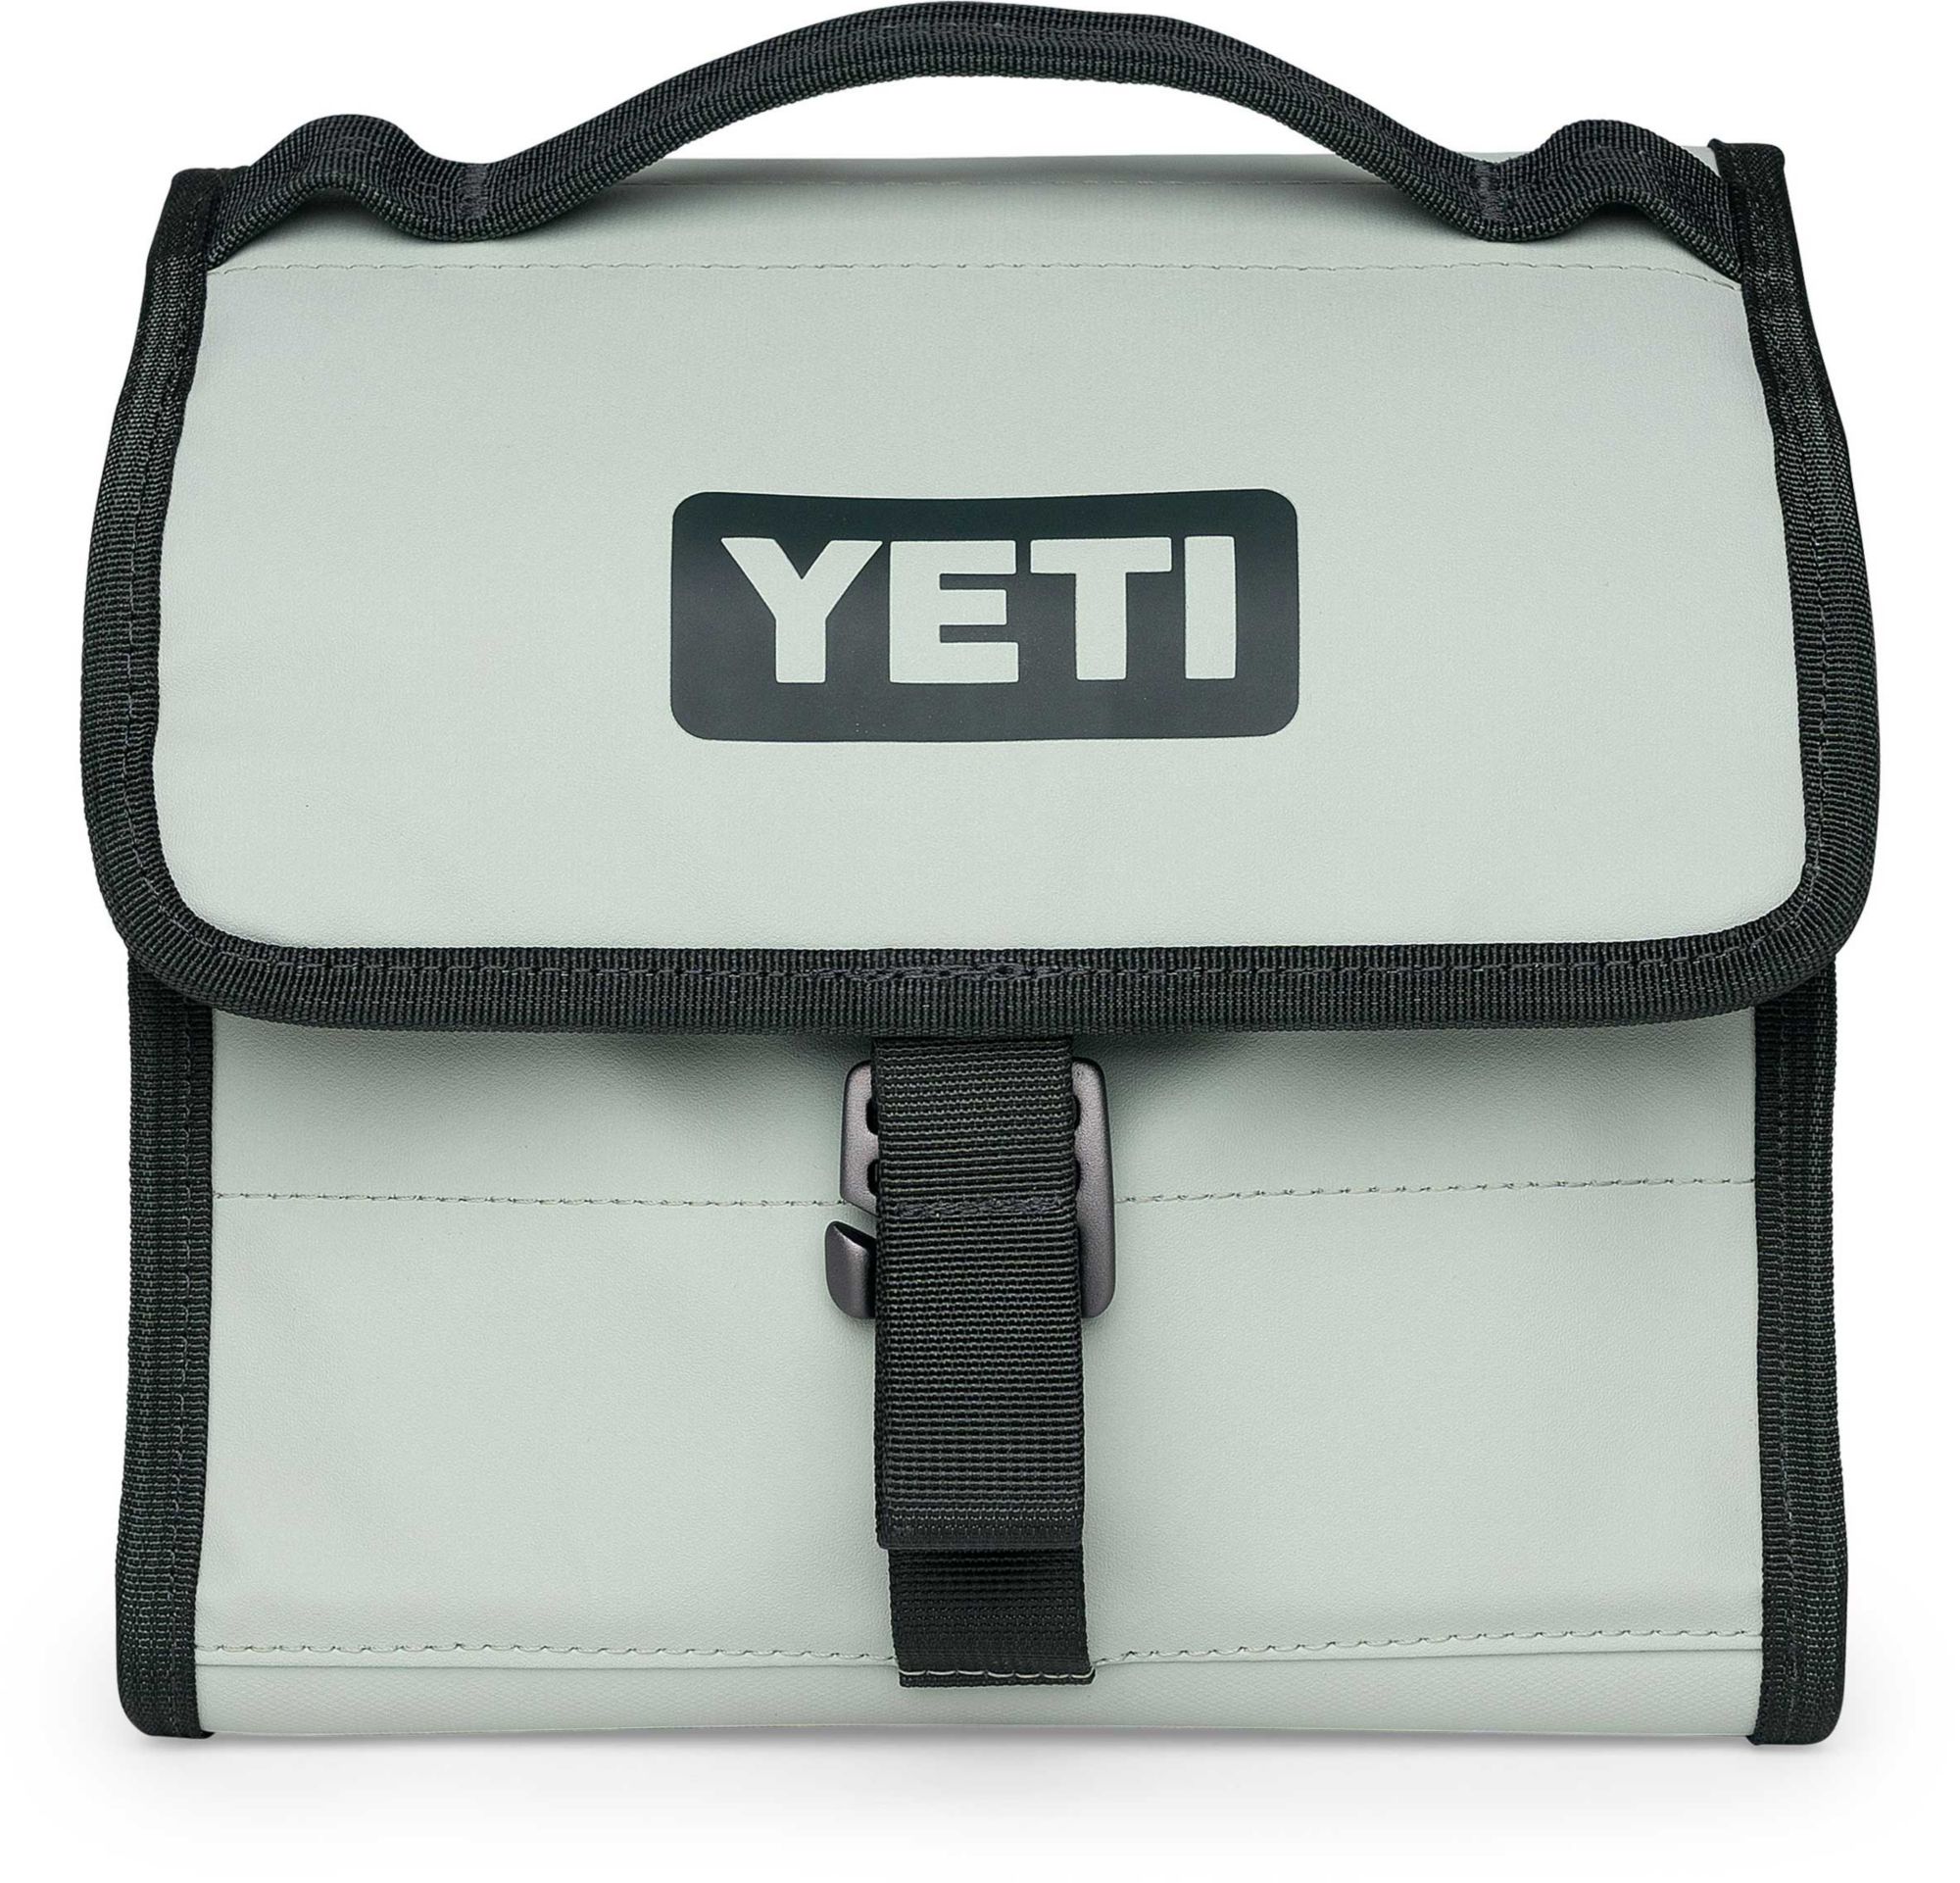 yeti lunch thermos